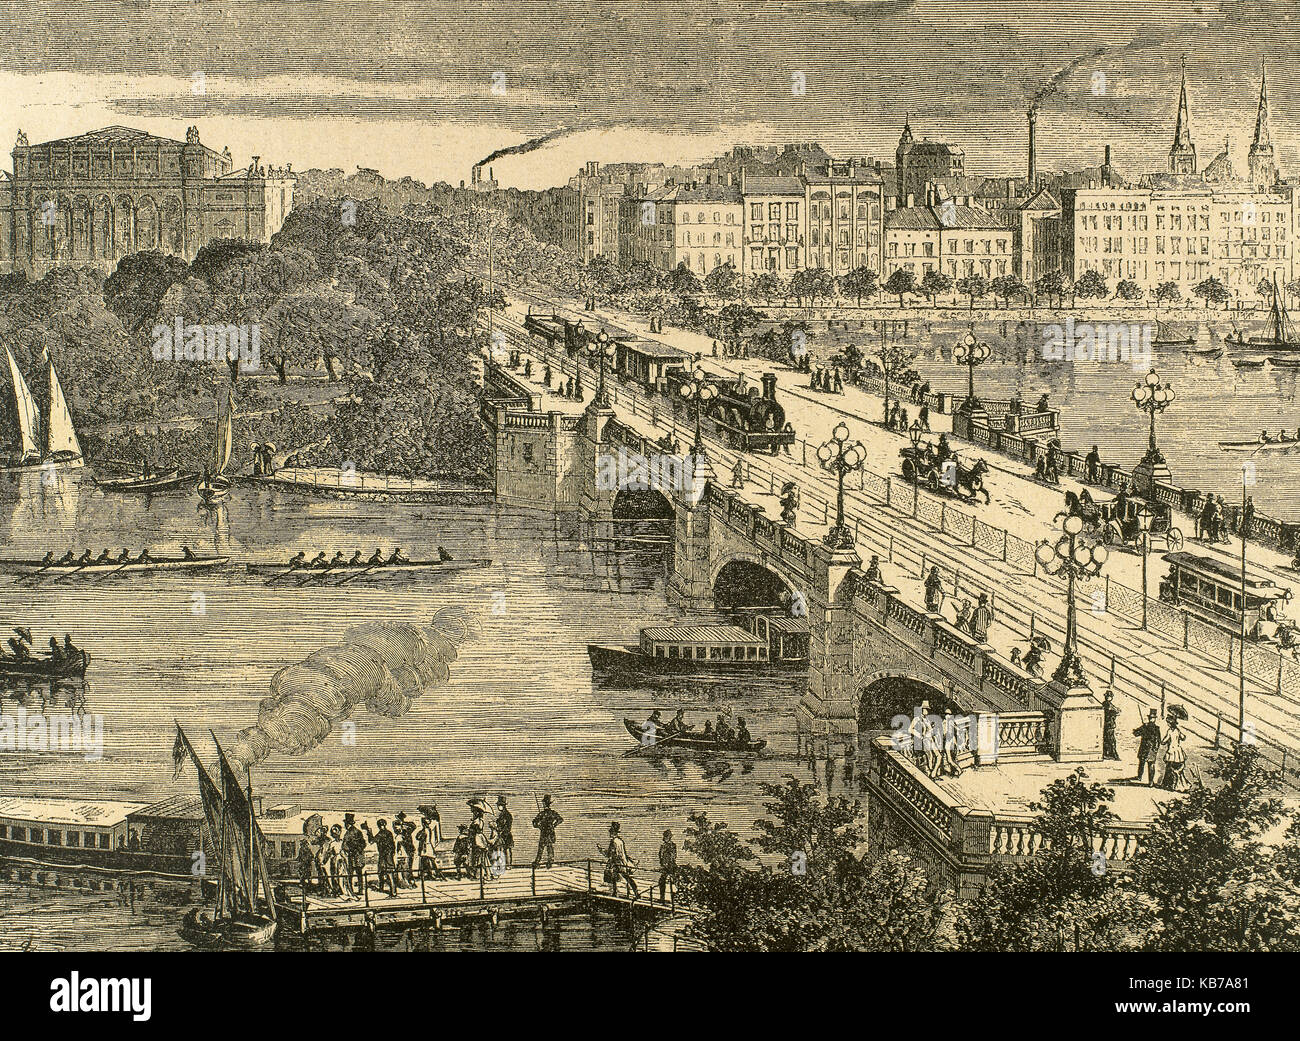 Germany. Hamburg. Cityscape with the Lombardo Bridge over the Alster river.  Engraving. 19th century. Stock Photo